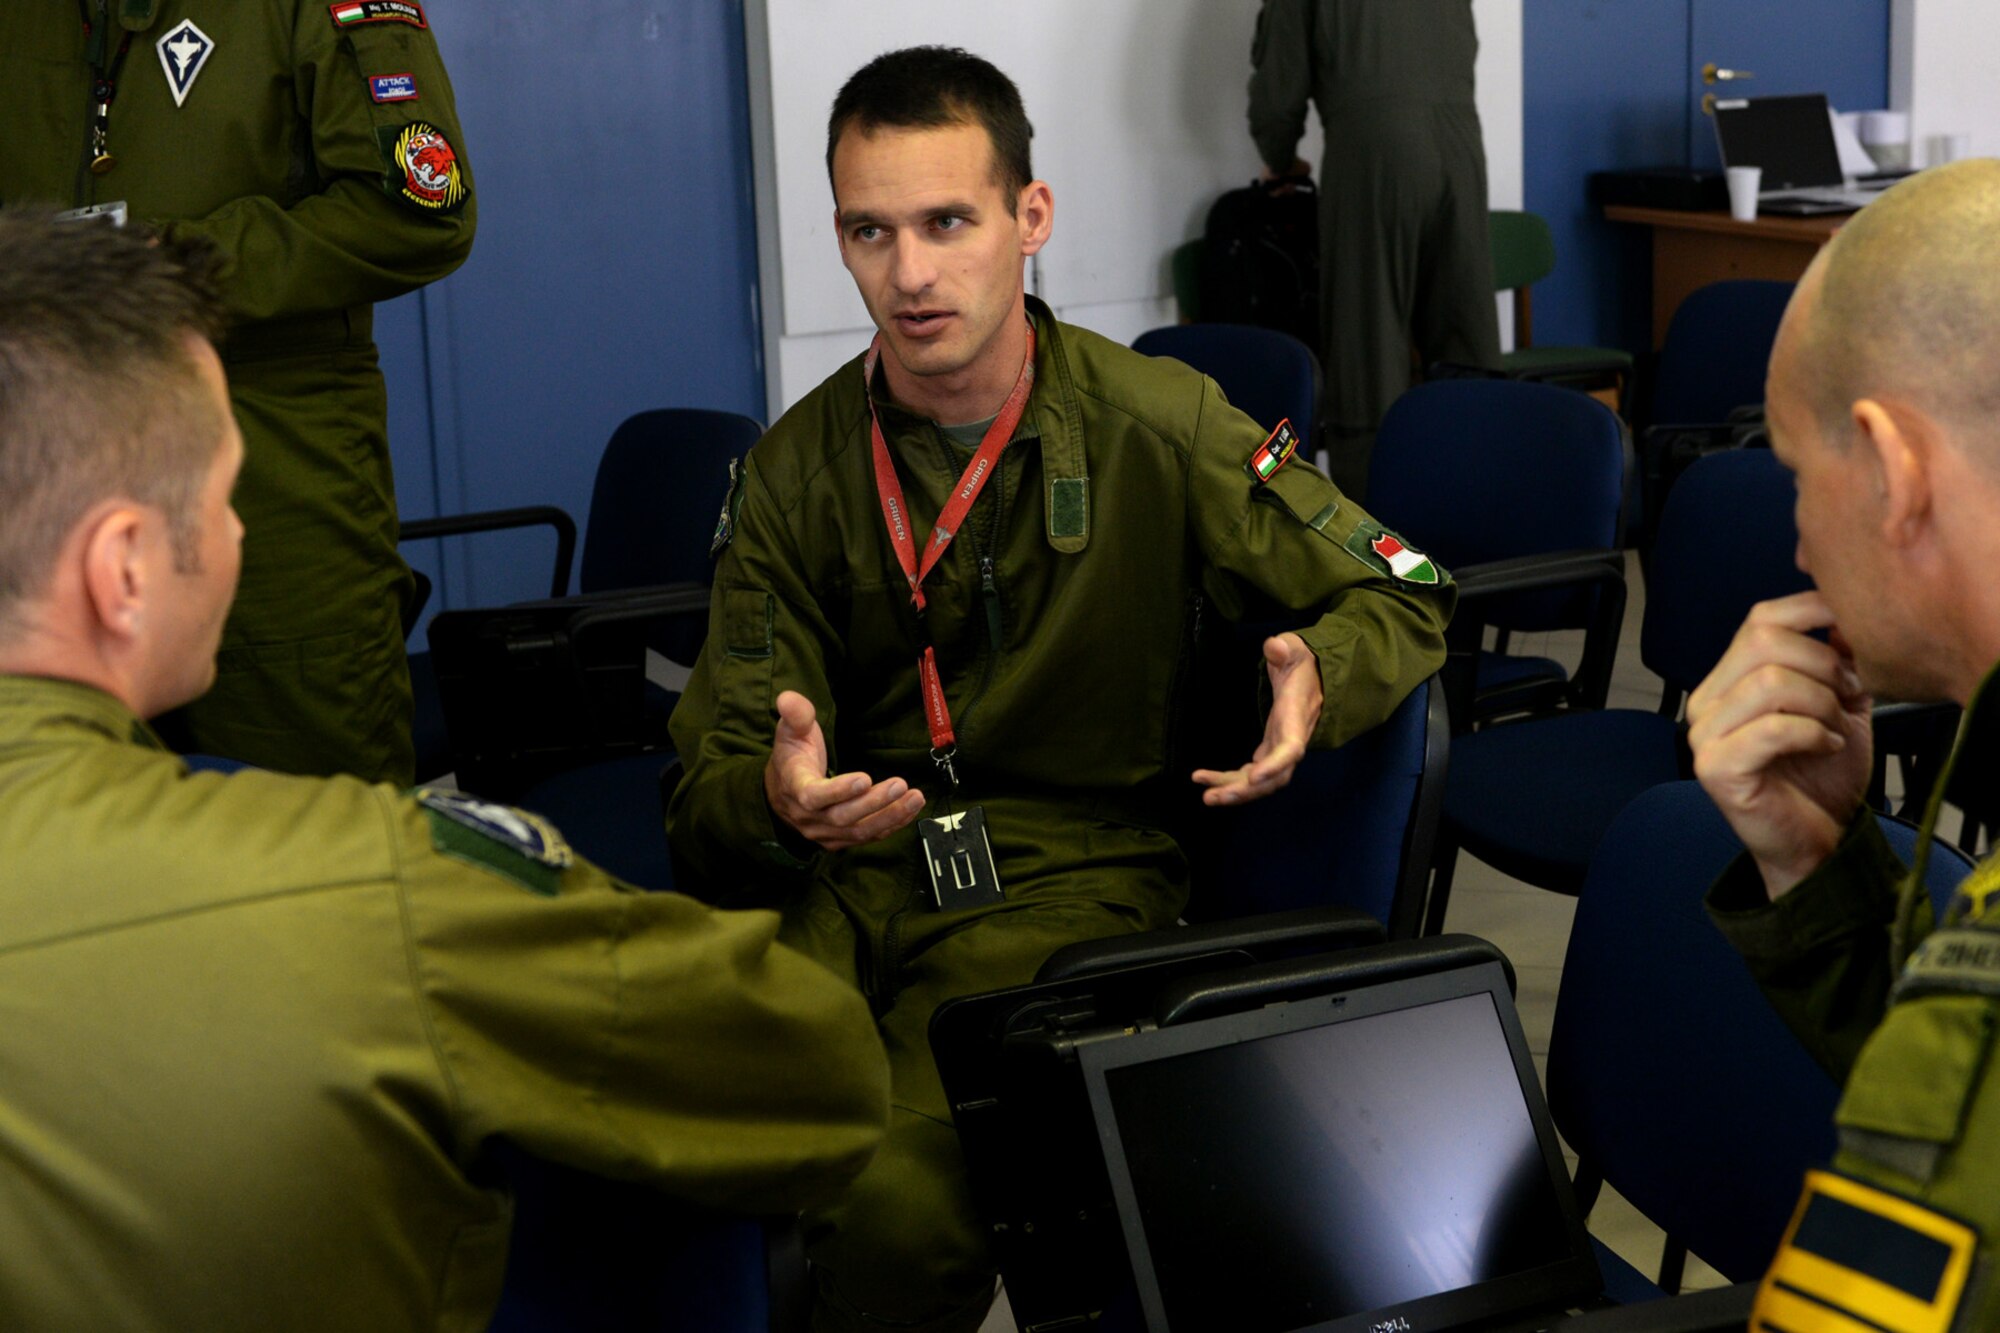 A Hungarian air force JAS-39 Gripen pilot discusses air refueling with Swedish air force Lt. Col. Pierre Ziherl and Maj. Henrik Lahti, Swedish AF Gripen Operational Testing and Evaluation instructor pilots, before their flight June 24, 2015, during AR familiarization training on Kecskemét air base, Hungary. The familiarization started with two days of classroom academics then each Hungarian Gripen pilot flew with a Swedish instructor pilot for hands-on practice. (U.S. Air Force photo by Senior Airman Kate Thornton/Released)